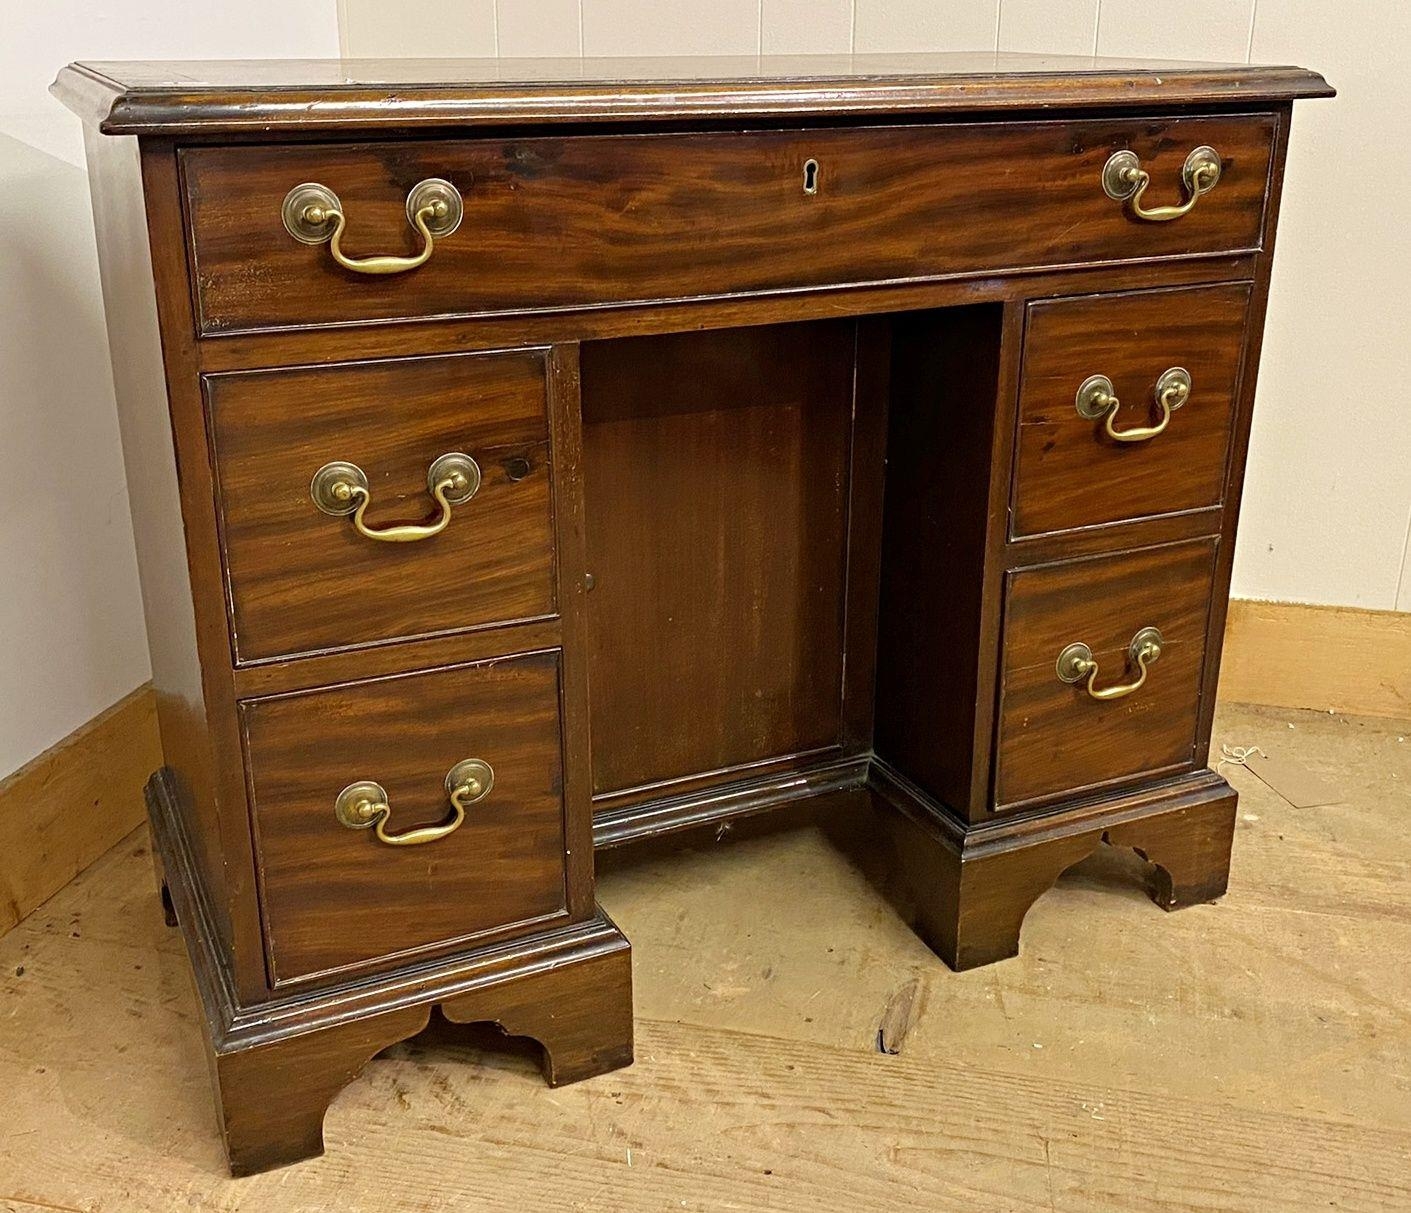 George III mahogany and flame mahogany cross banded knee hole desk, fitted with five drawers and